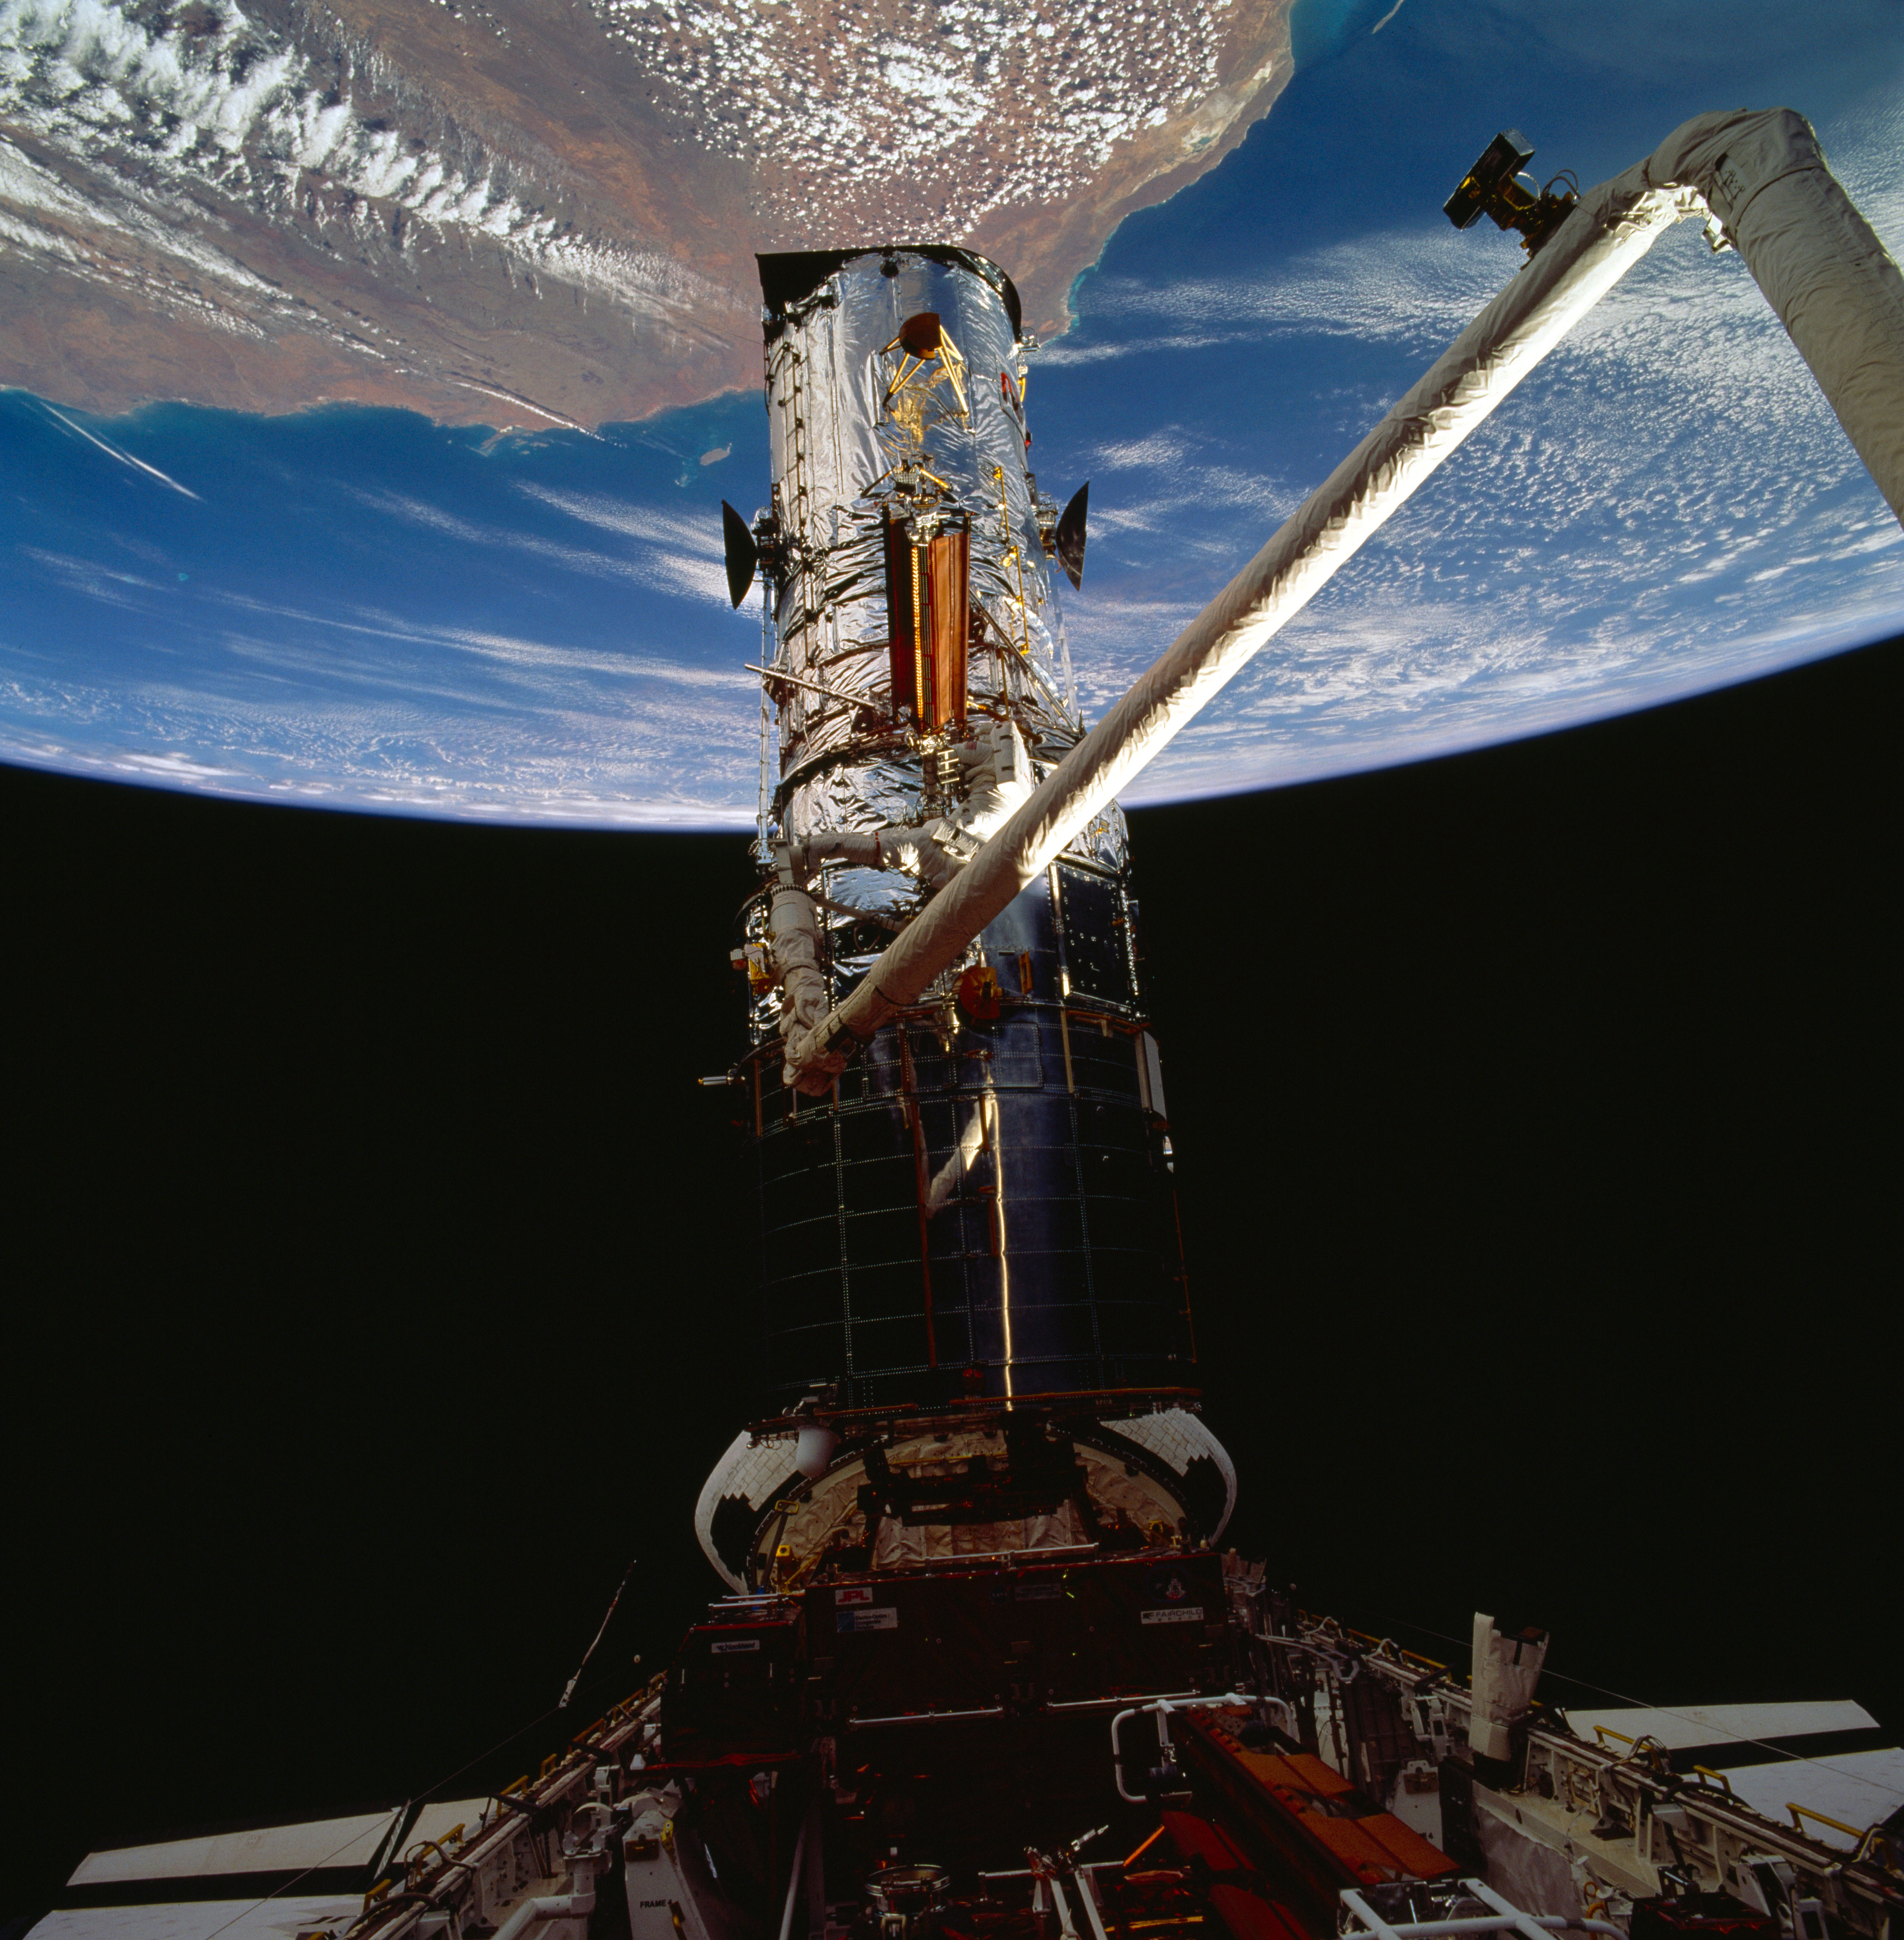 Thornton disconnects Hubble’s retracted solar array